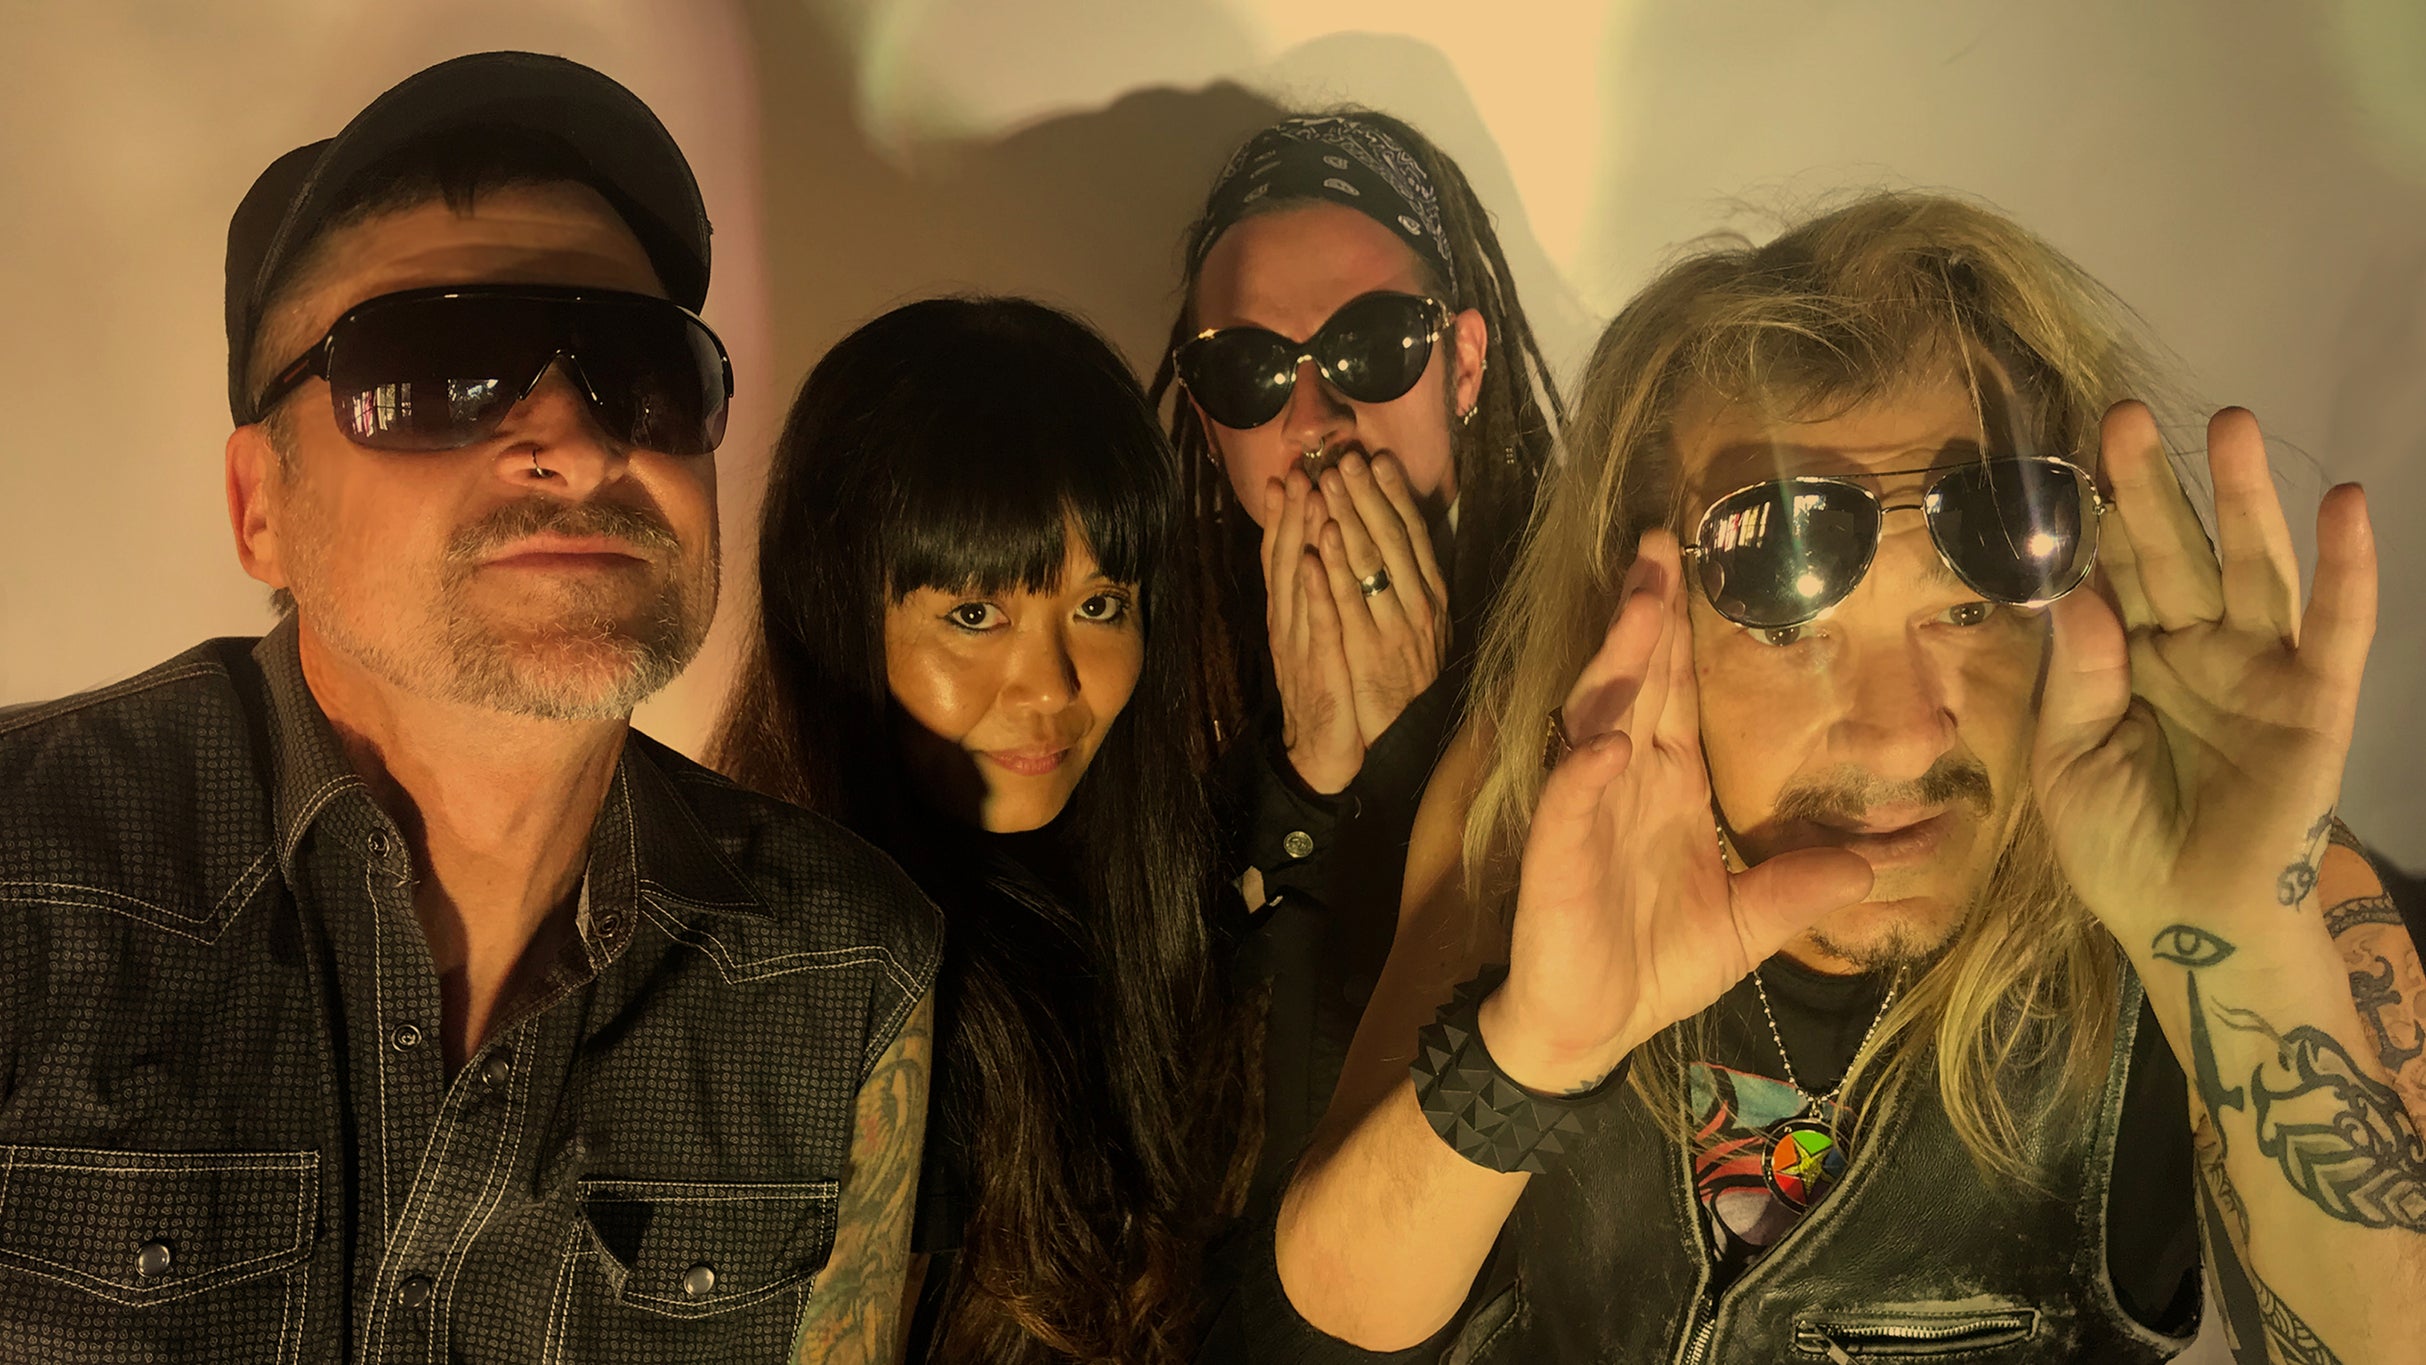 My Life with the Thrill Kill Kult presale code for legit tickets in Santa Ana